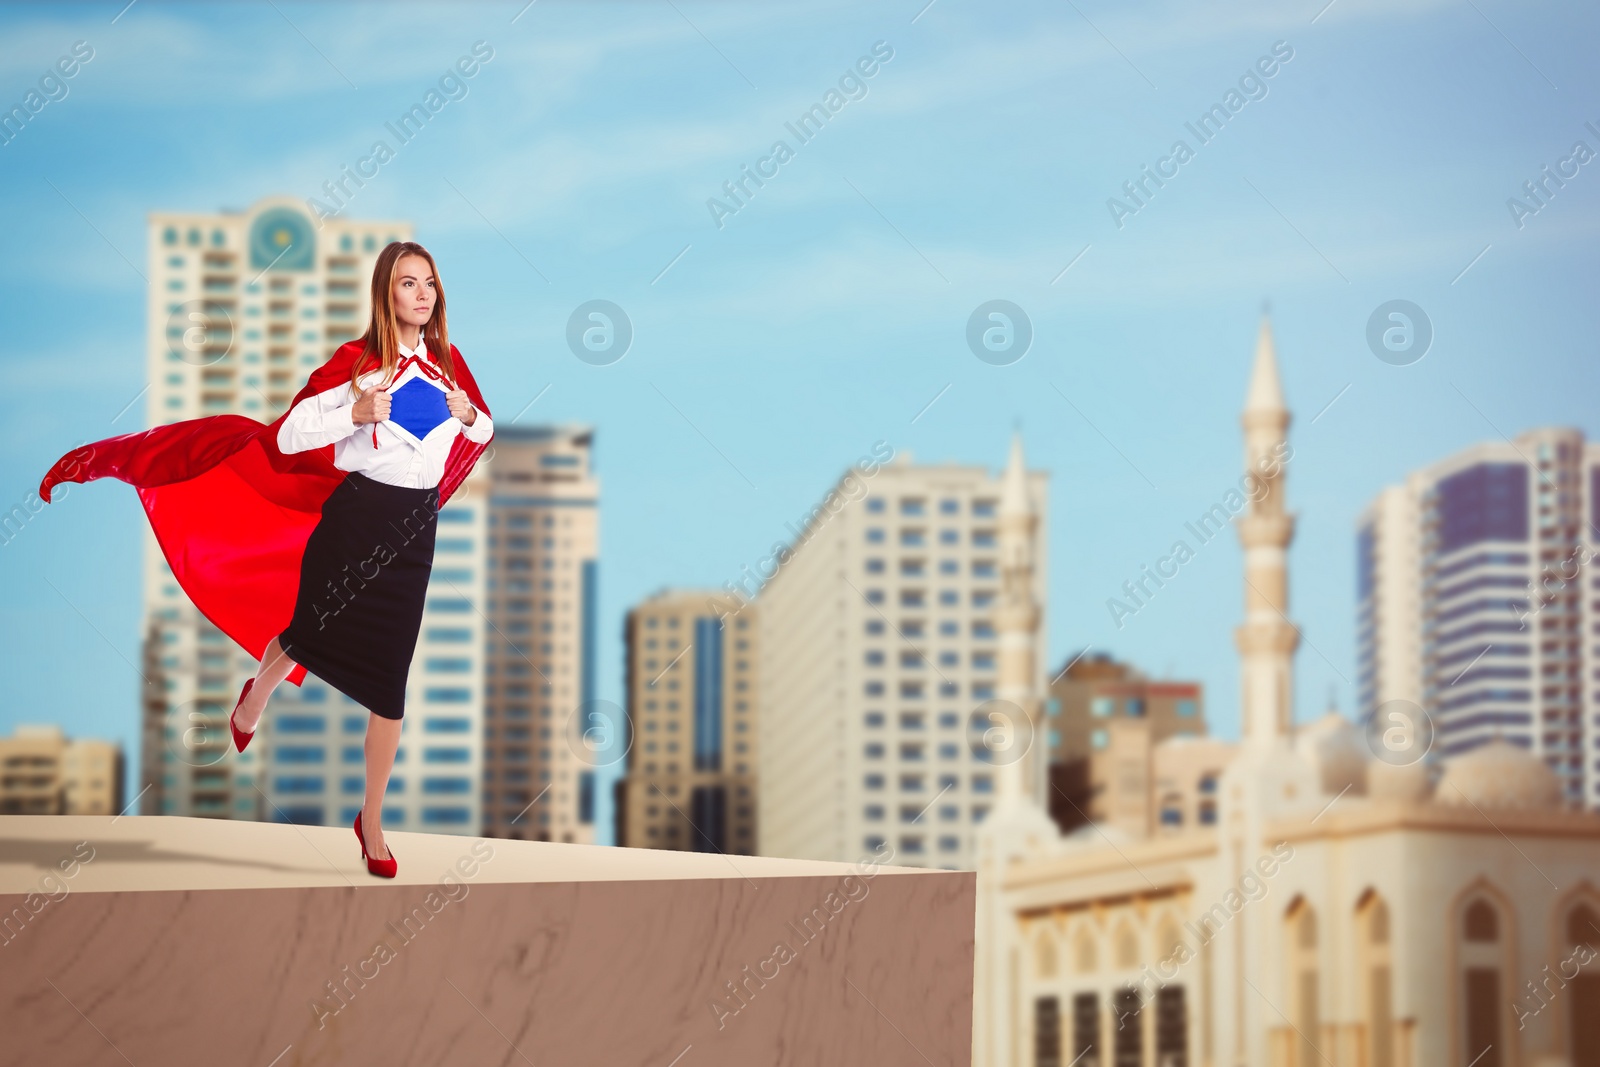 Image of Superhero, motivation and power. Woman in red cape on high building in city